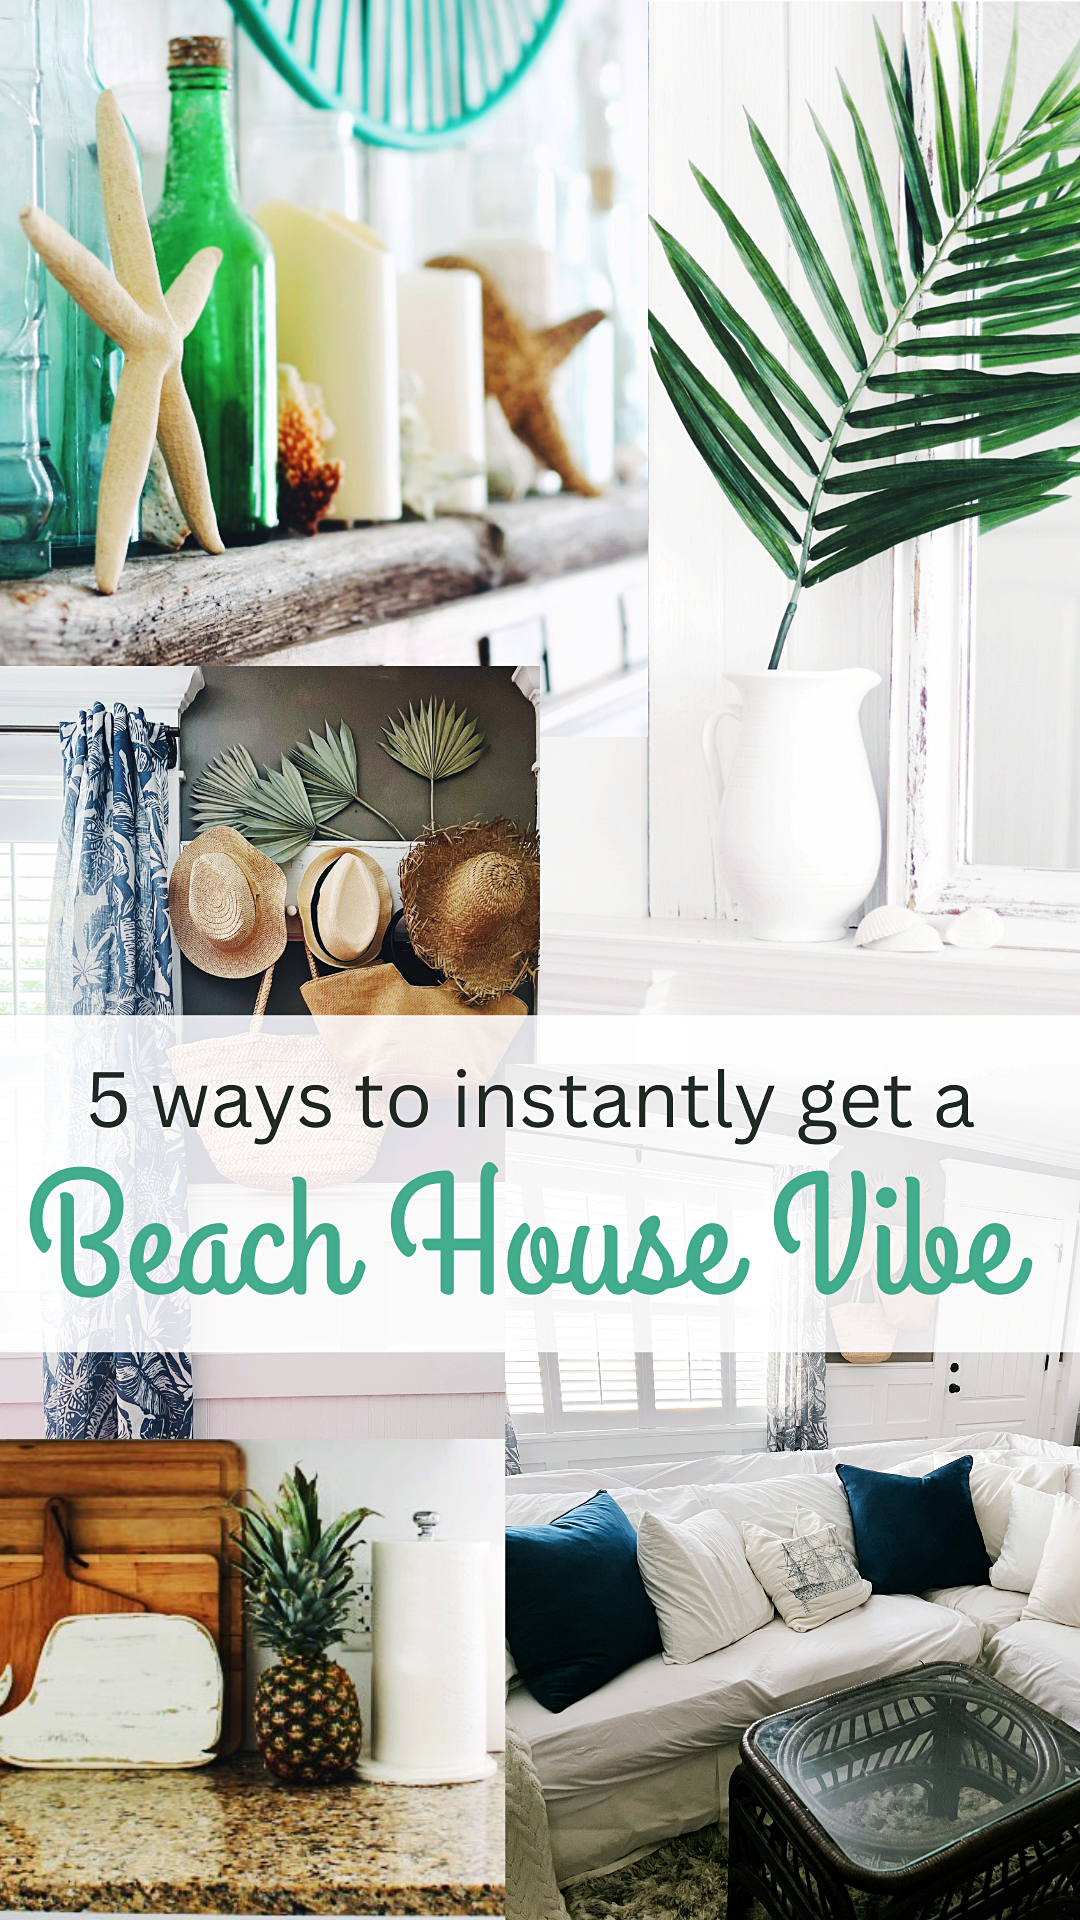 5 ways to instantly get a Beach House Vibe